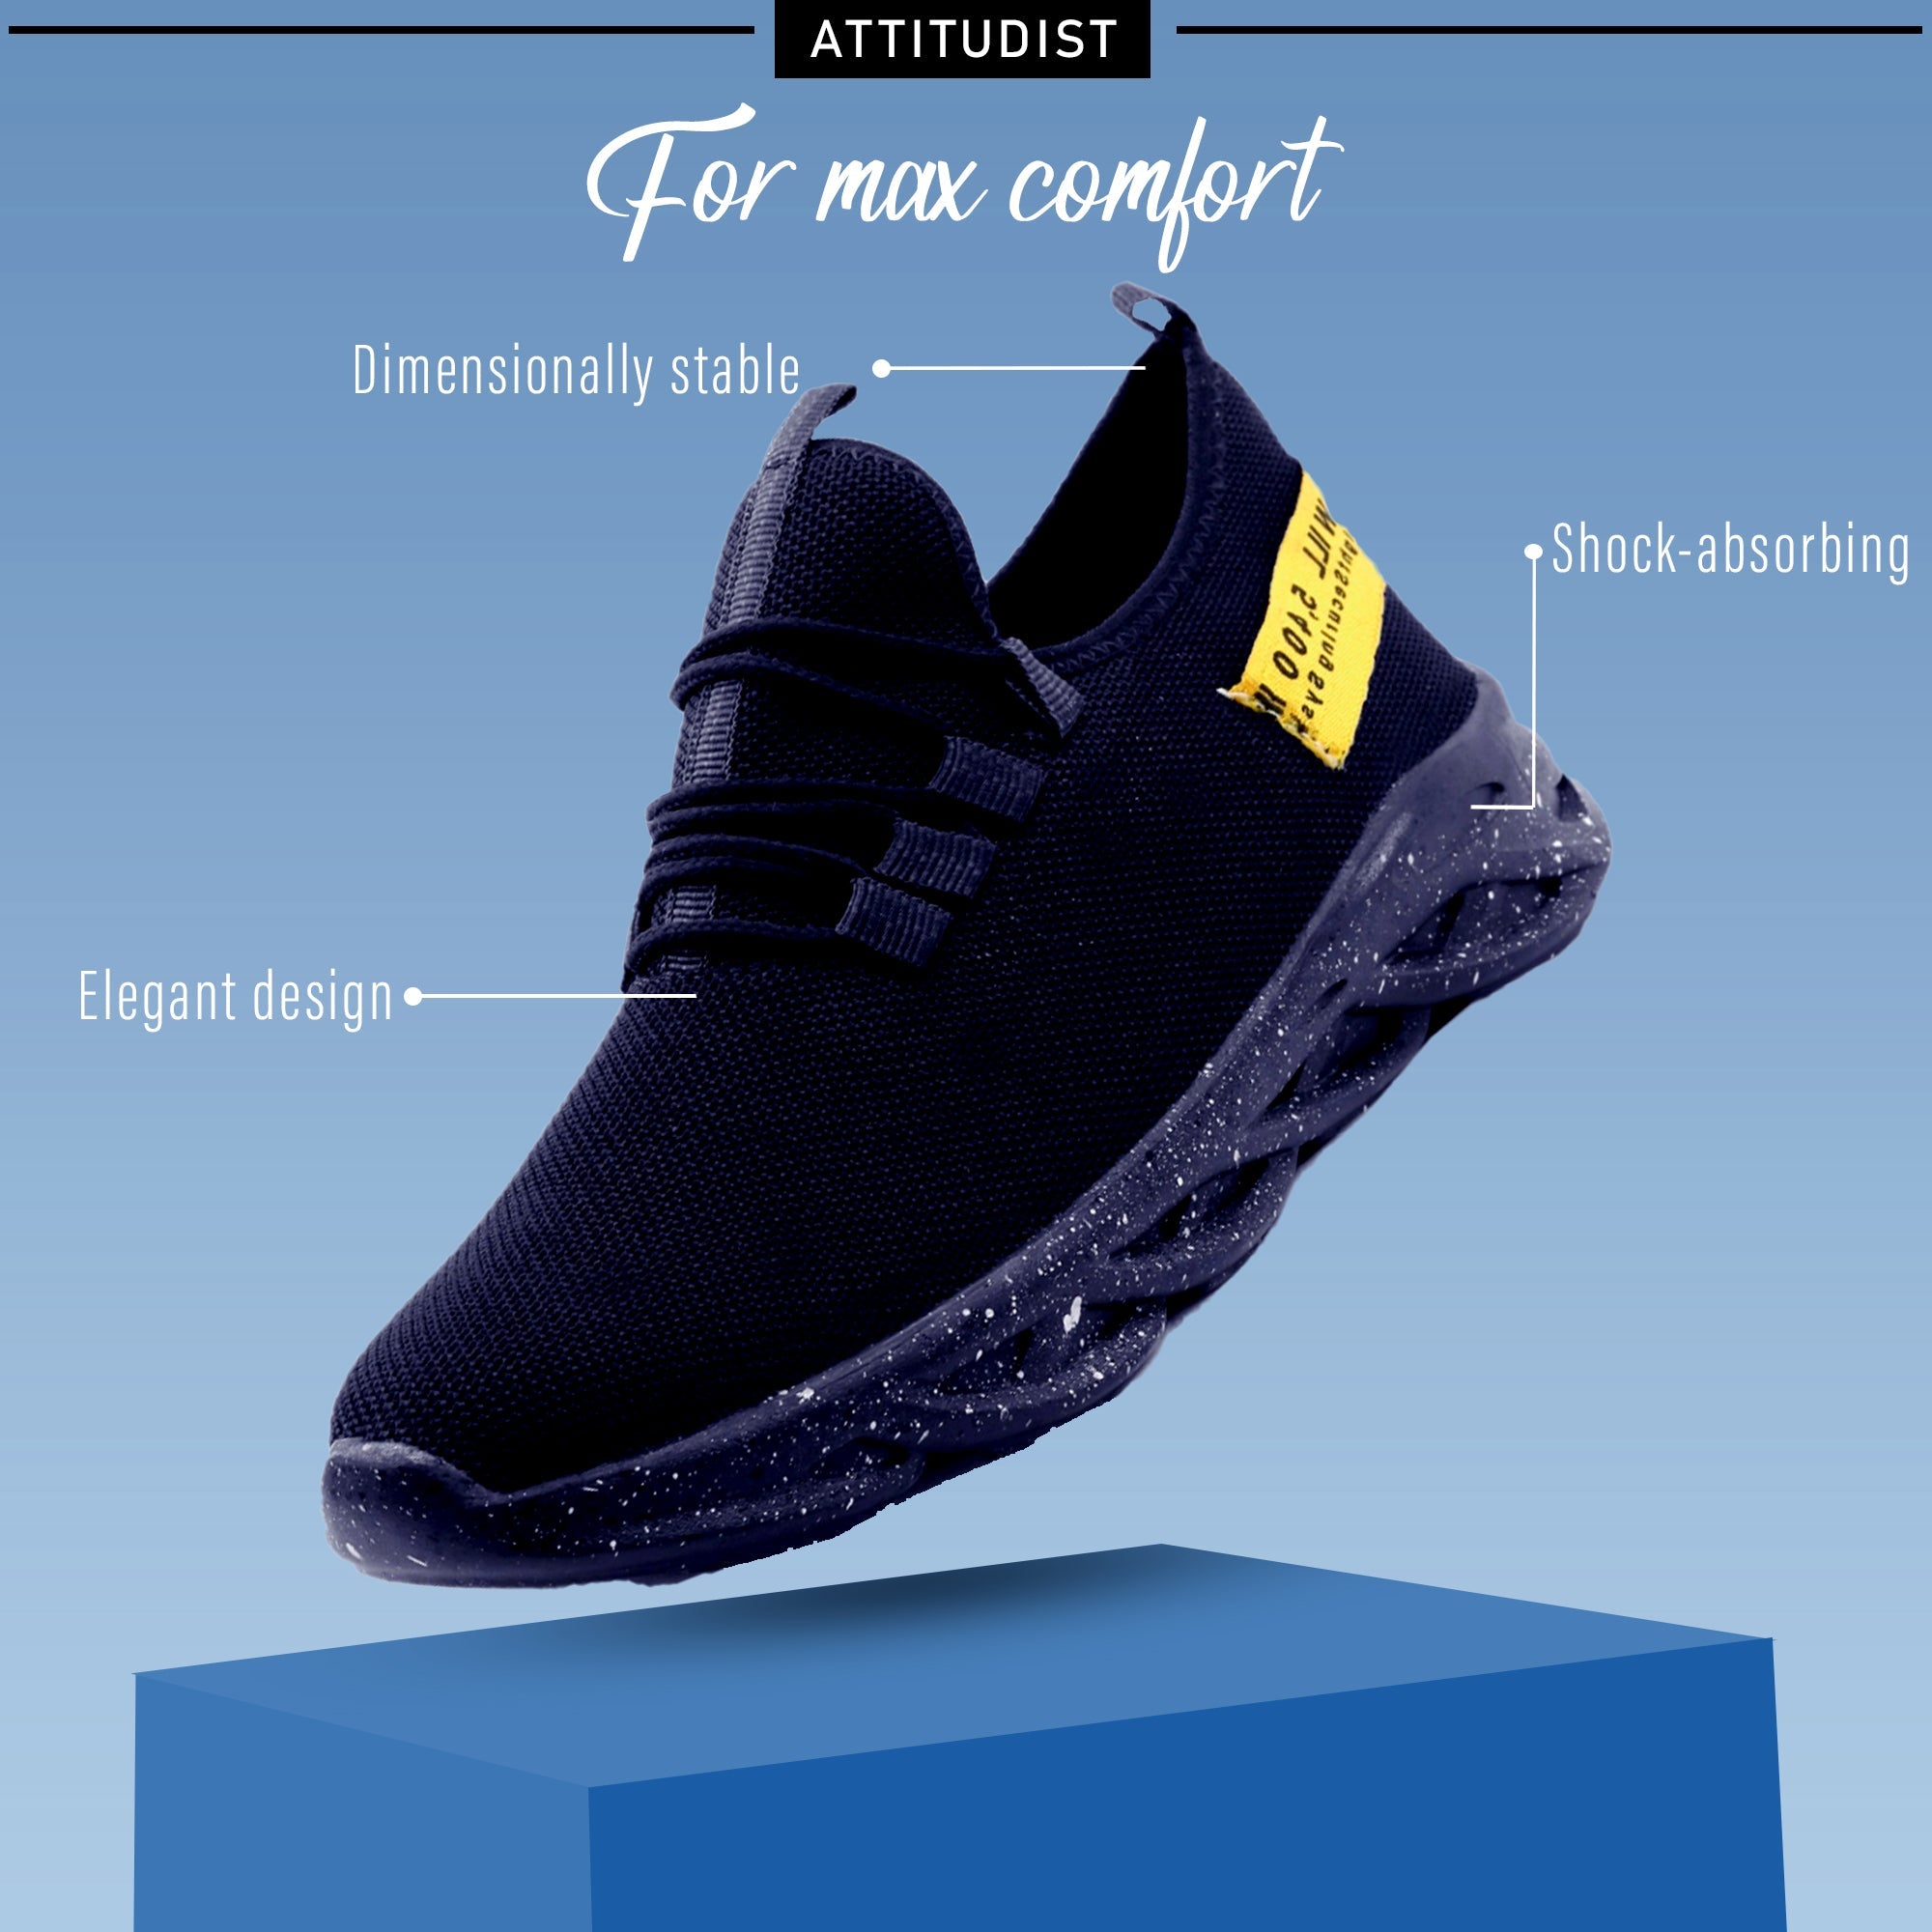 attitudist-blue-light-weight-all-day-comfy-sports-shoes-for-men-10